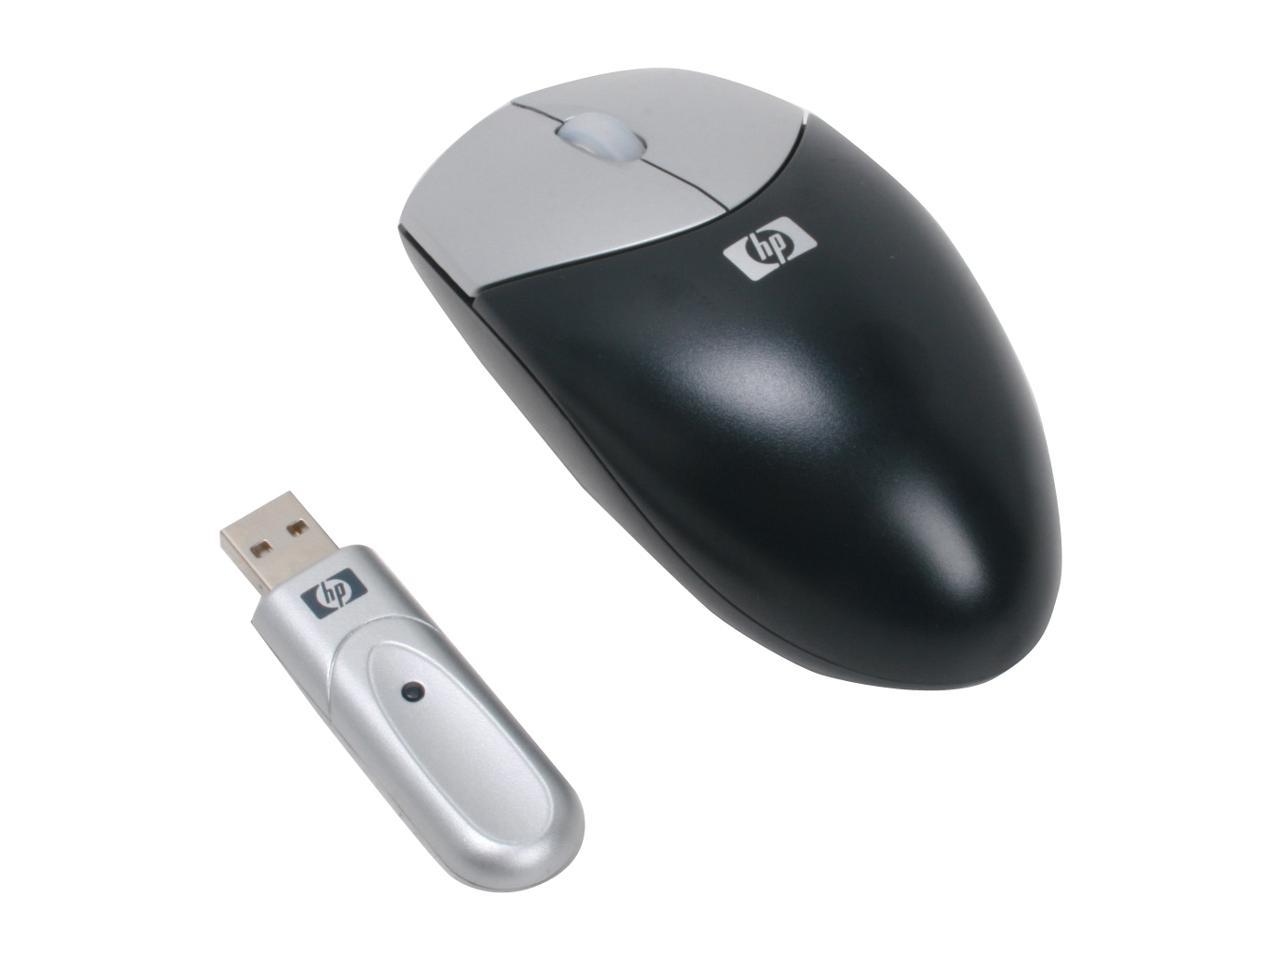 hp wireless mouse x3000 troubleshooting